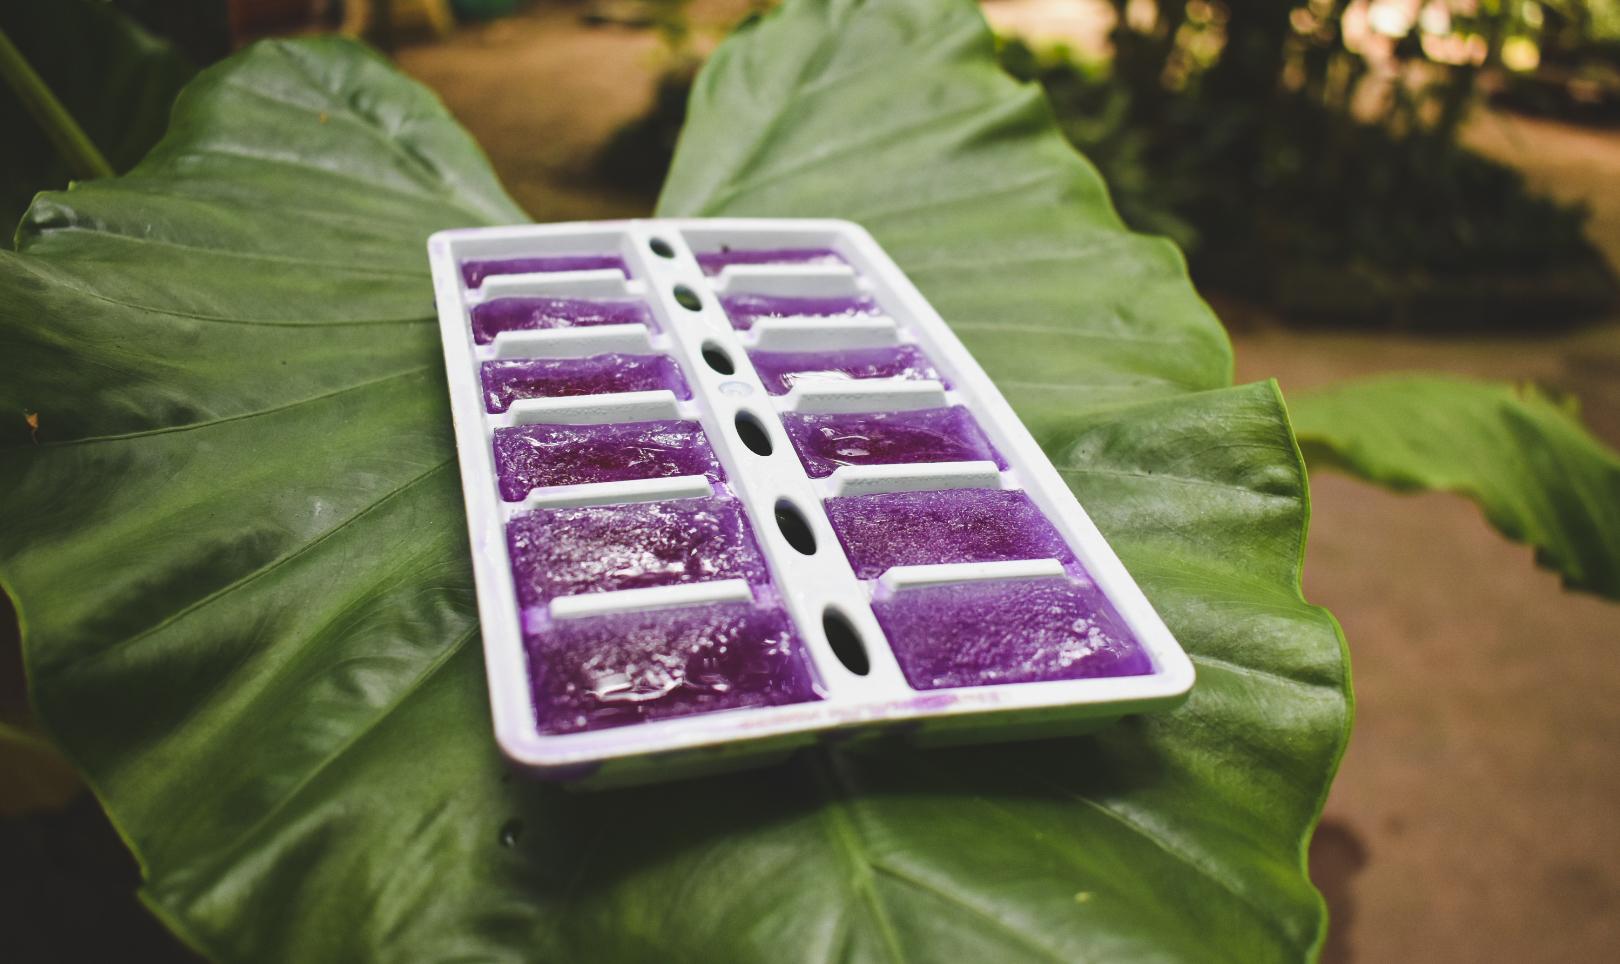 Butterfly pea ice cubes